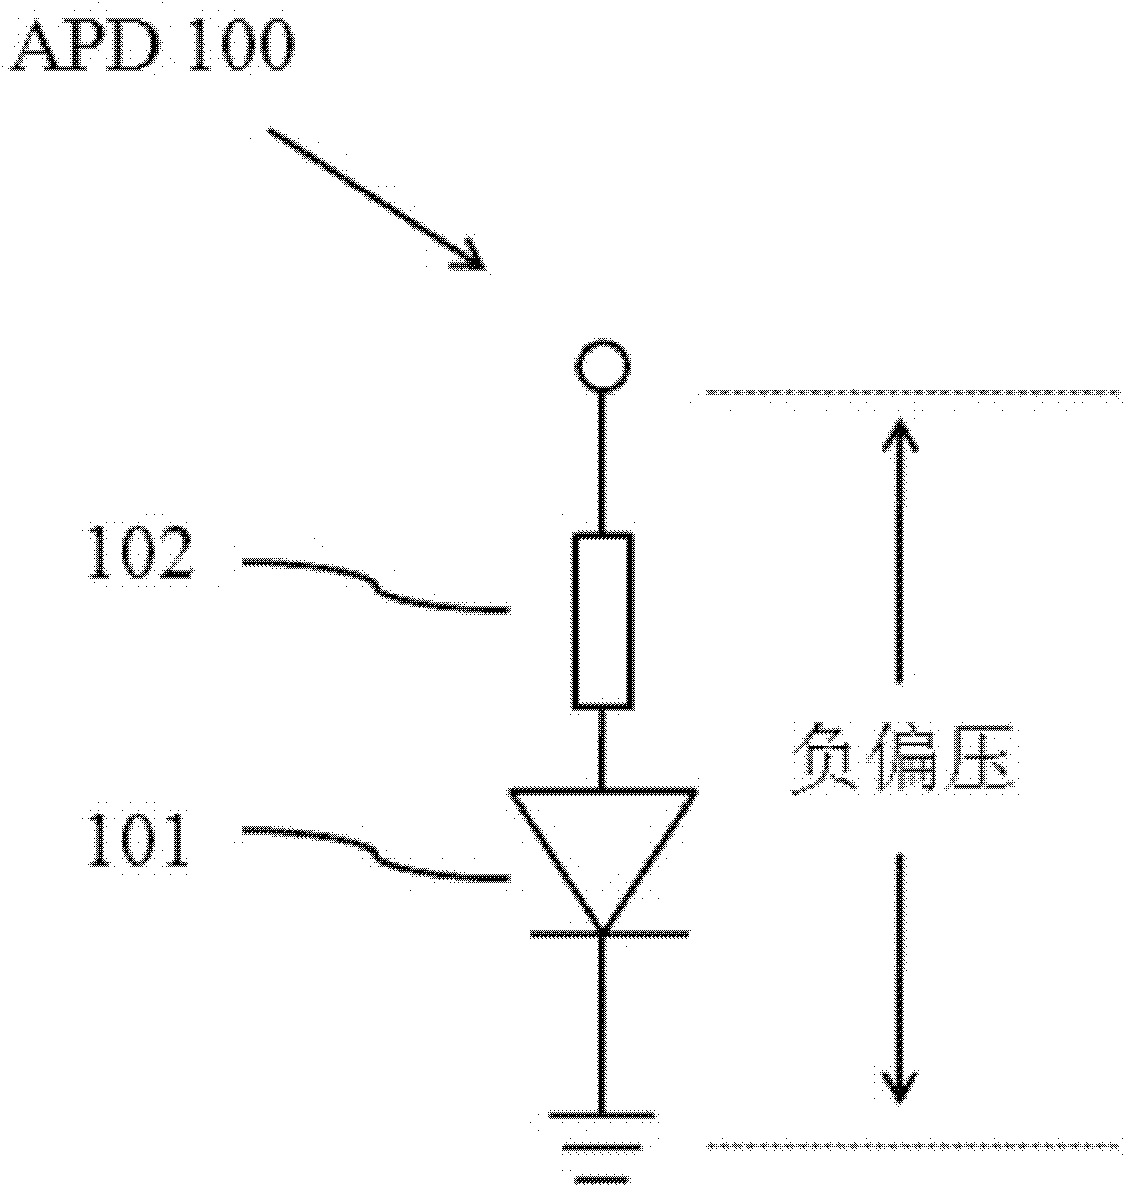 Ultraviolet avalanche diode imaging array pixel, application method thereof and avalanche transistor imaging array